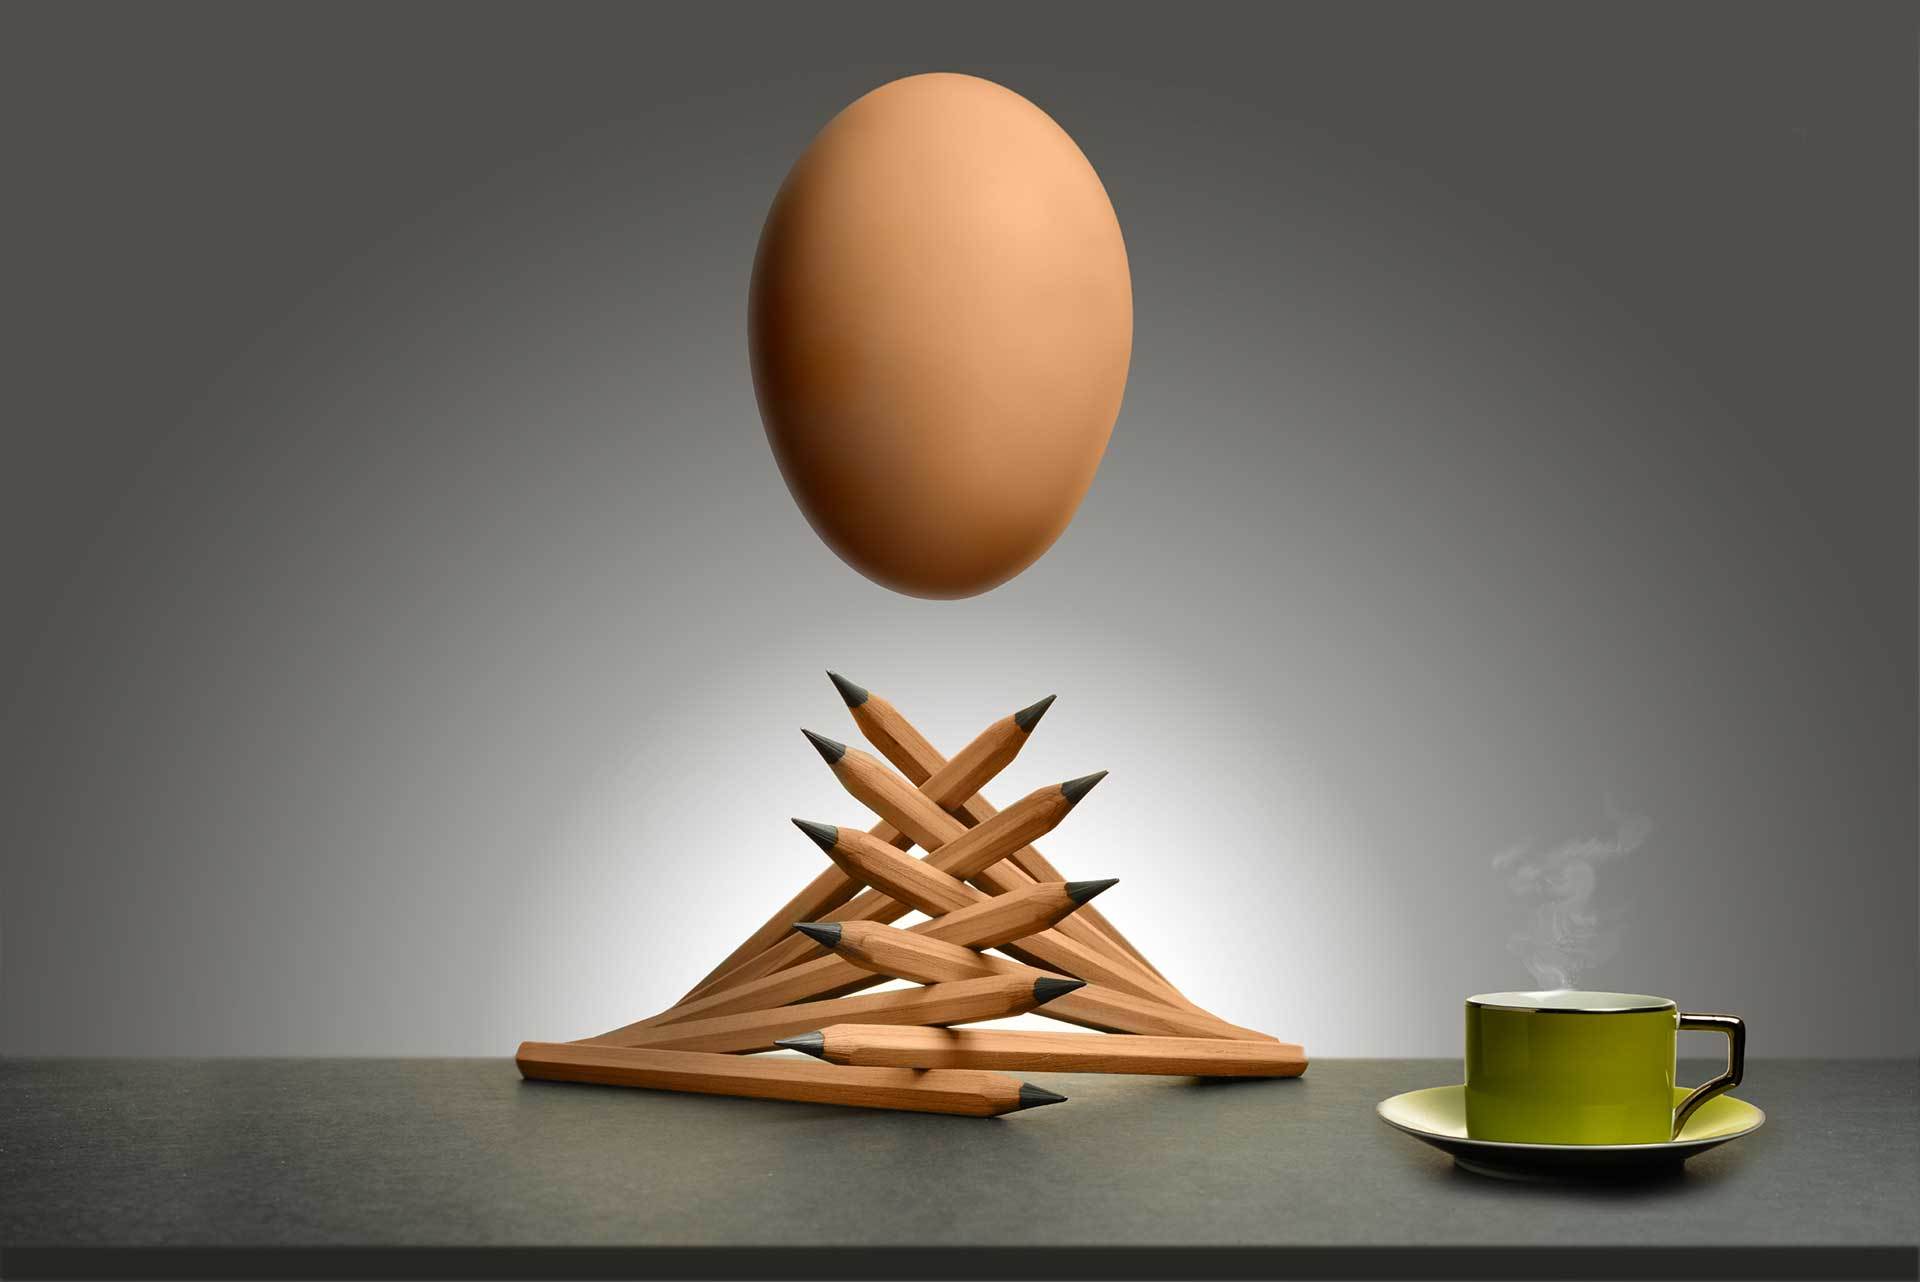 Egg With Pencils